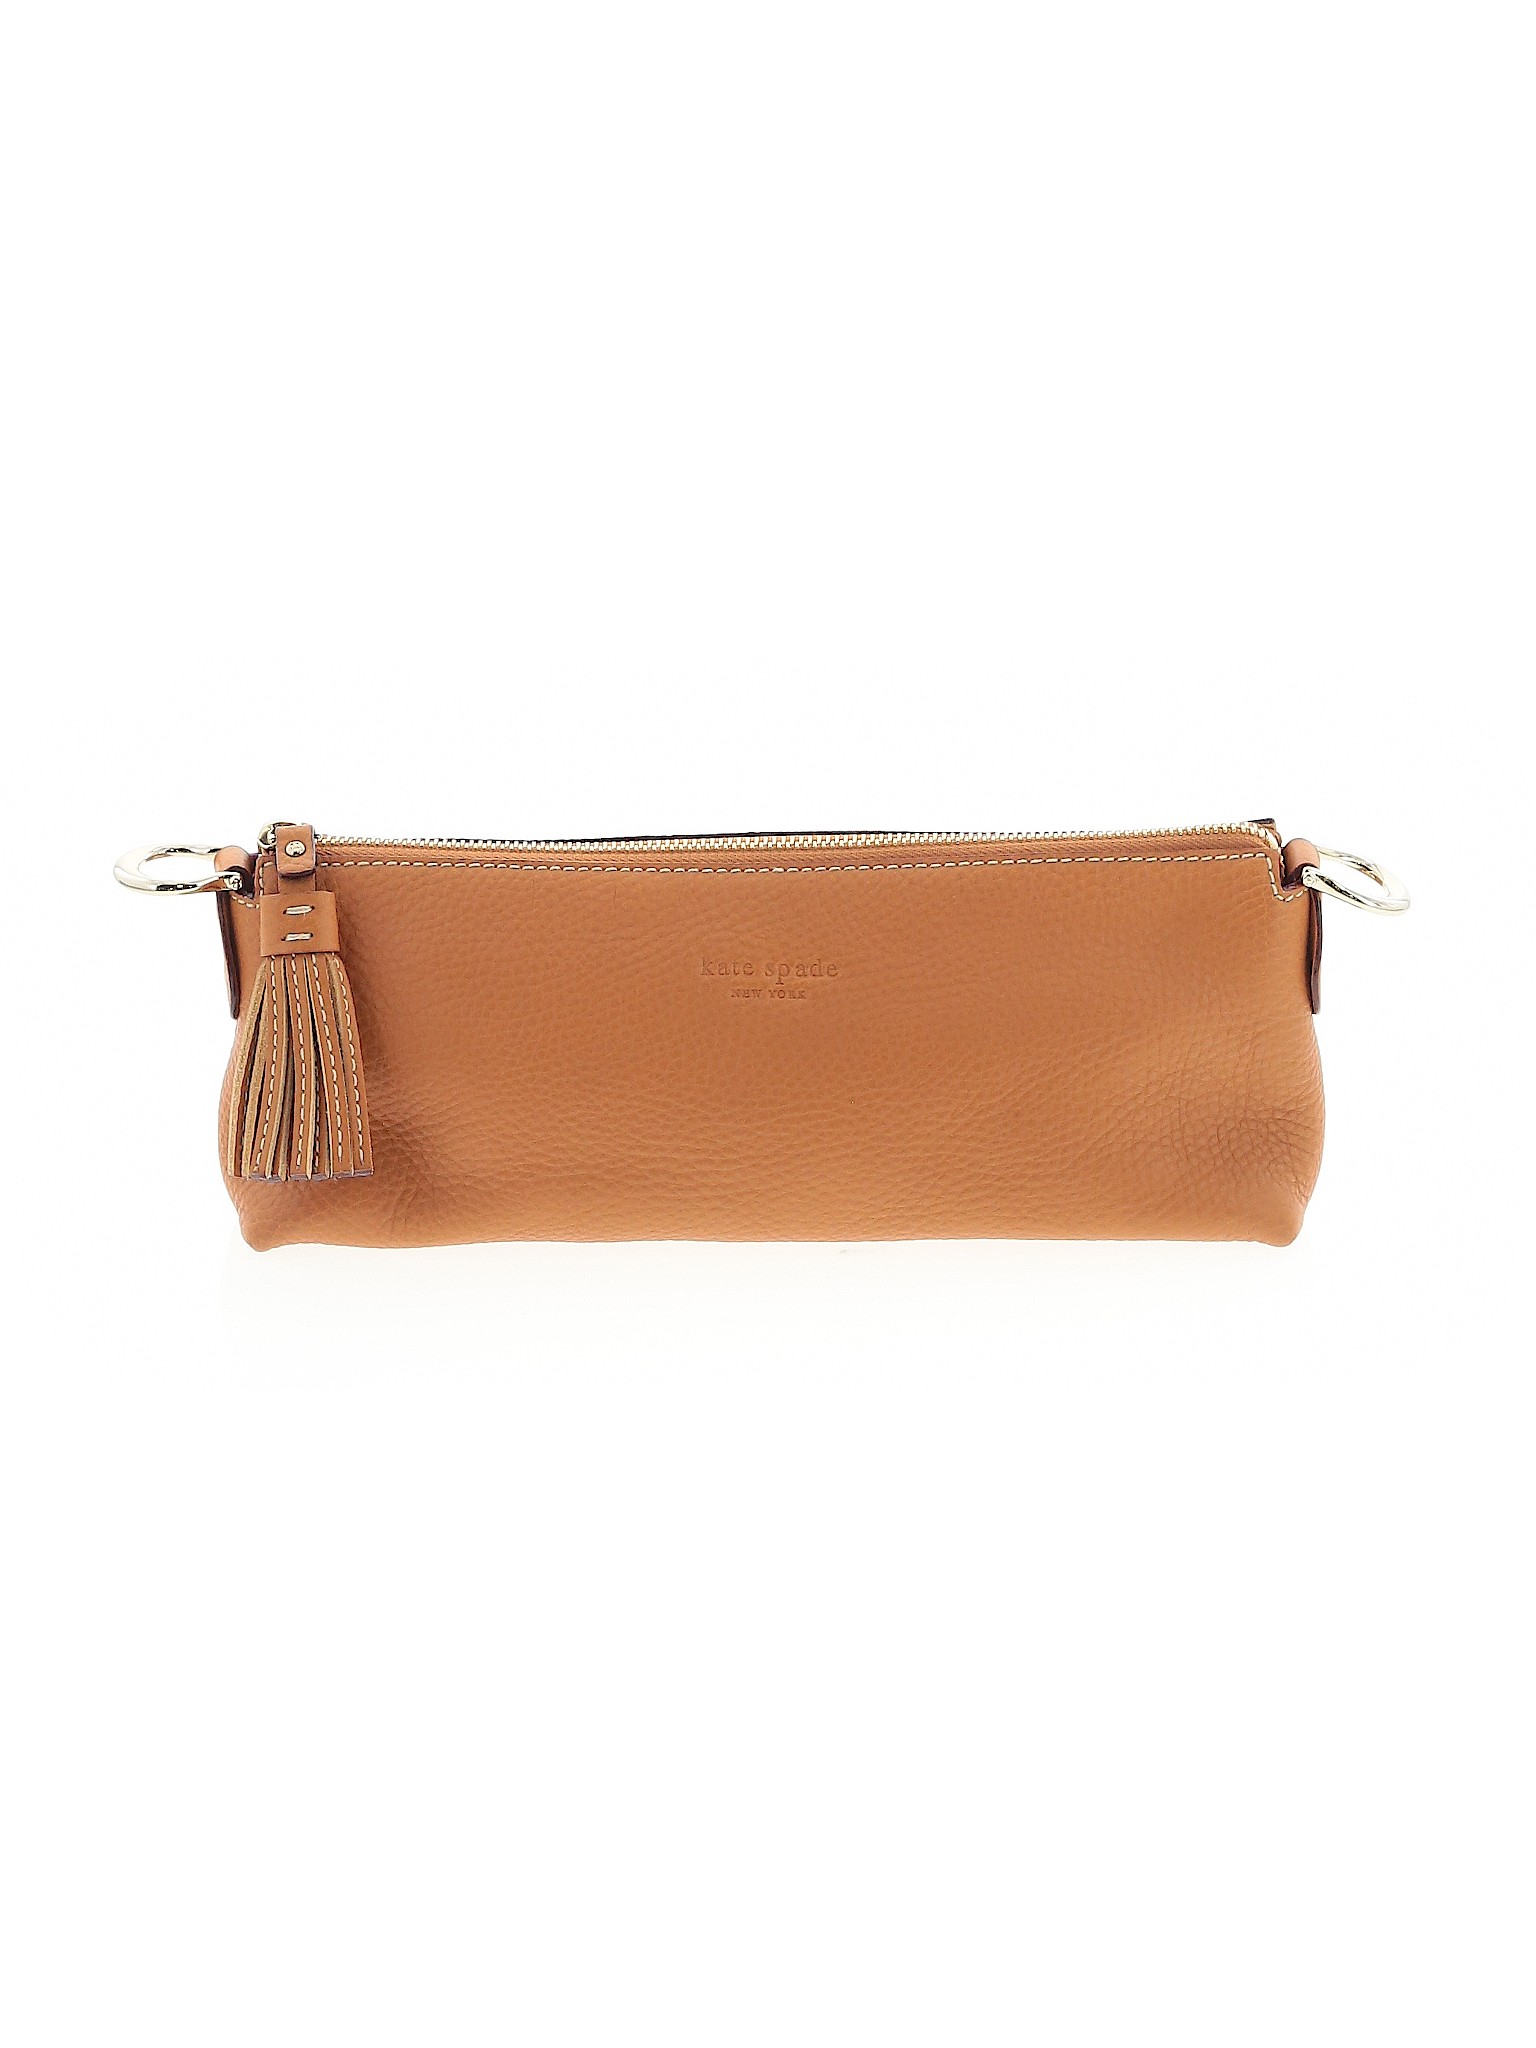 Details about Kate Spade New York Women Brown Leather Clutch One Size